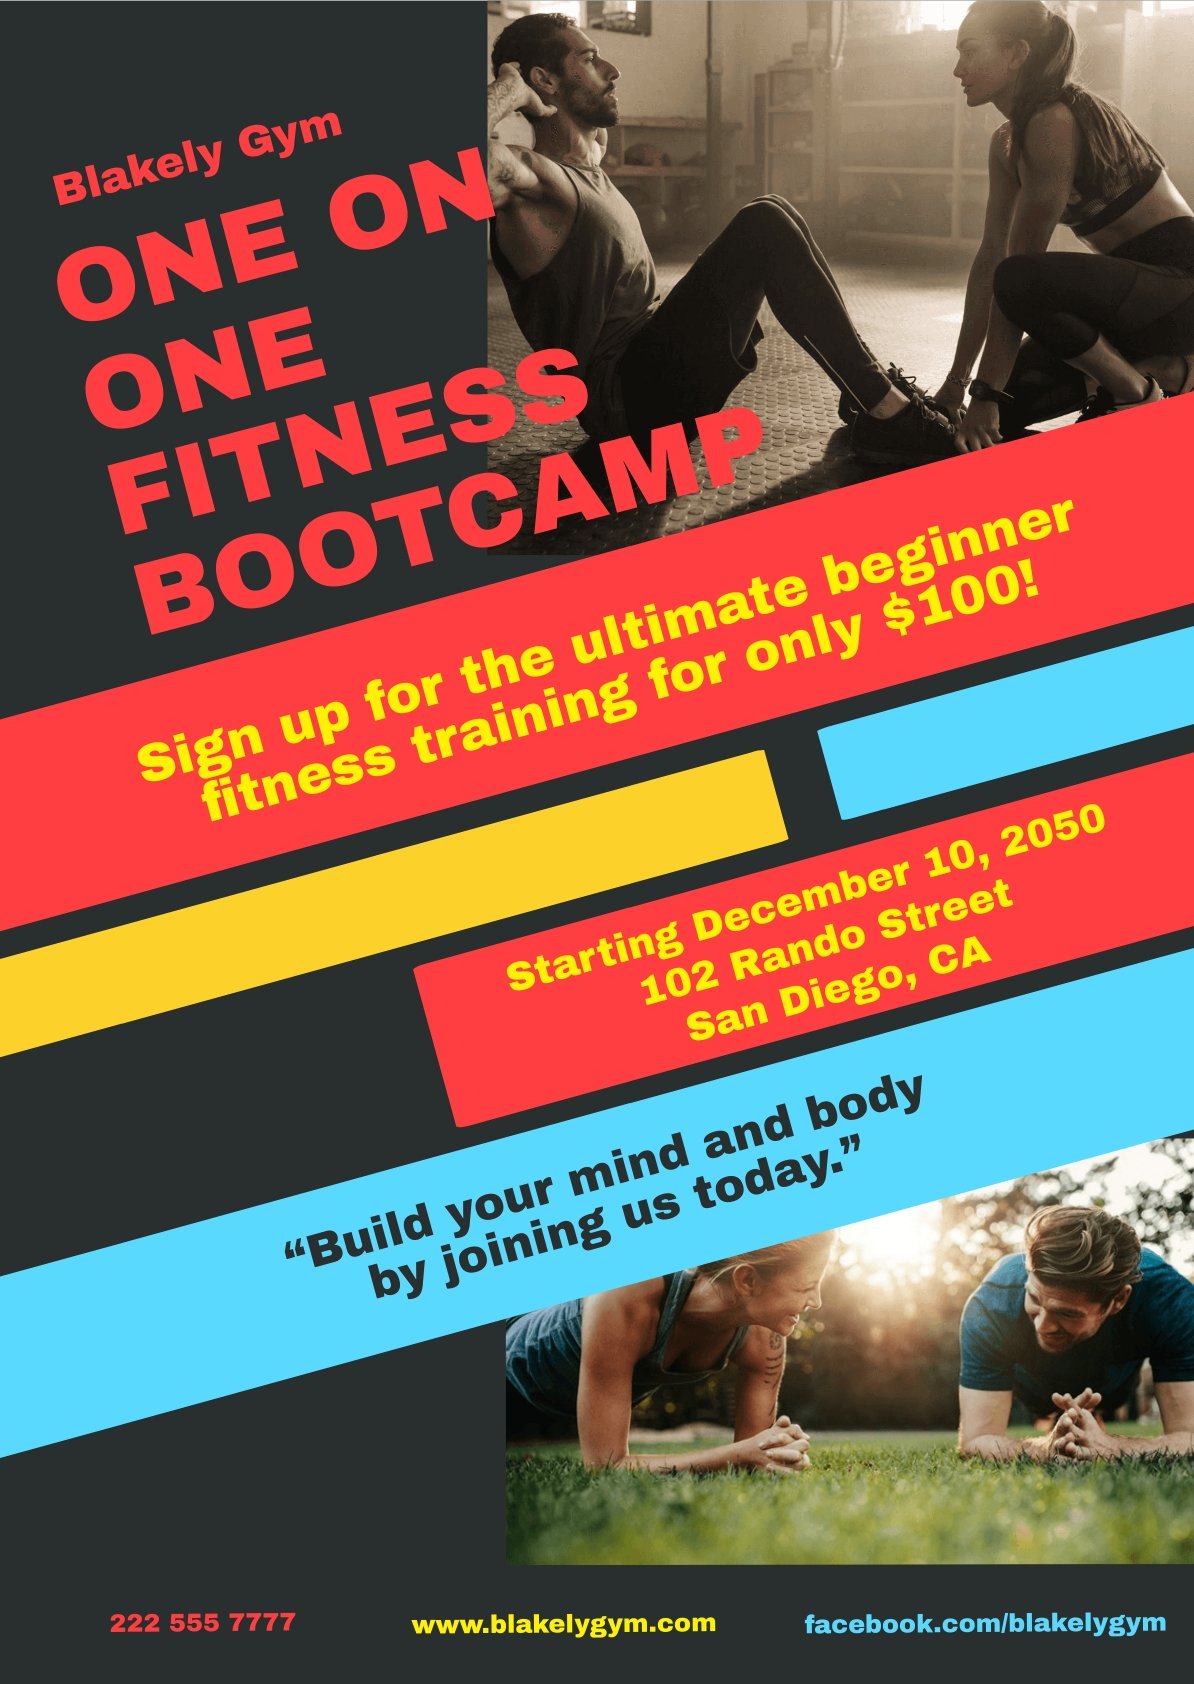 Free Personal Training Boot Camp Flyer